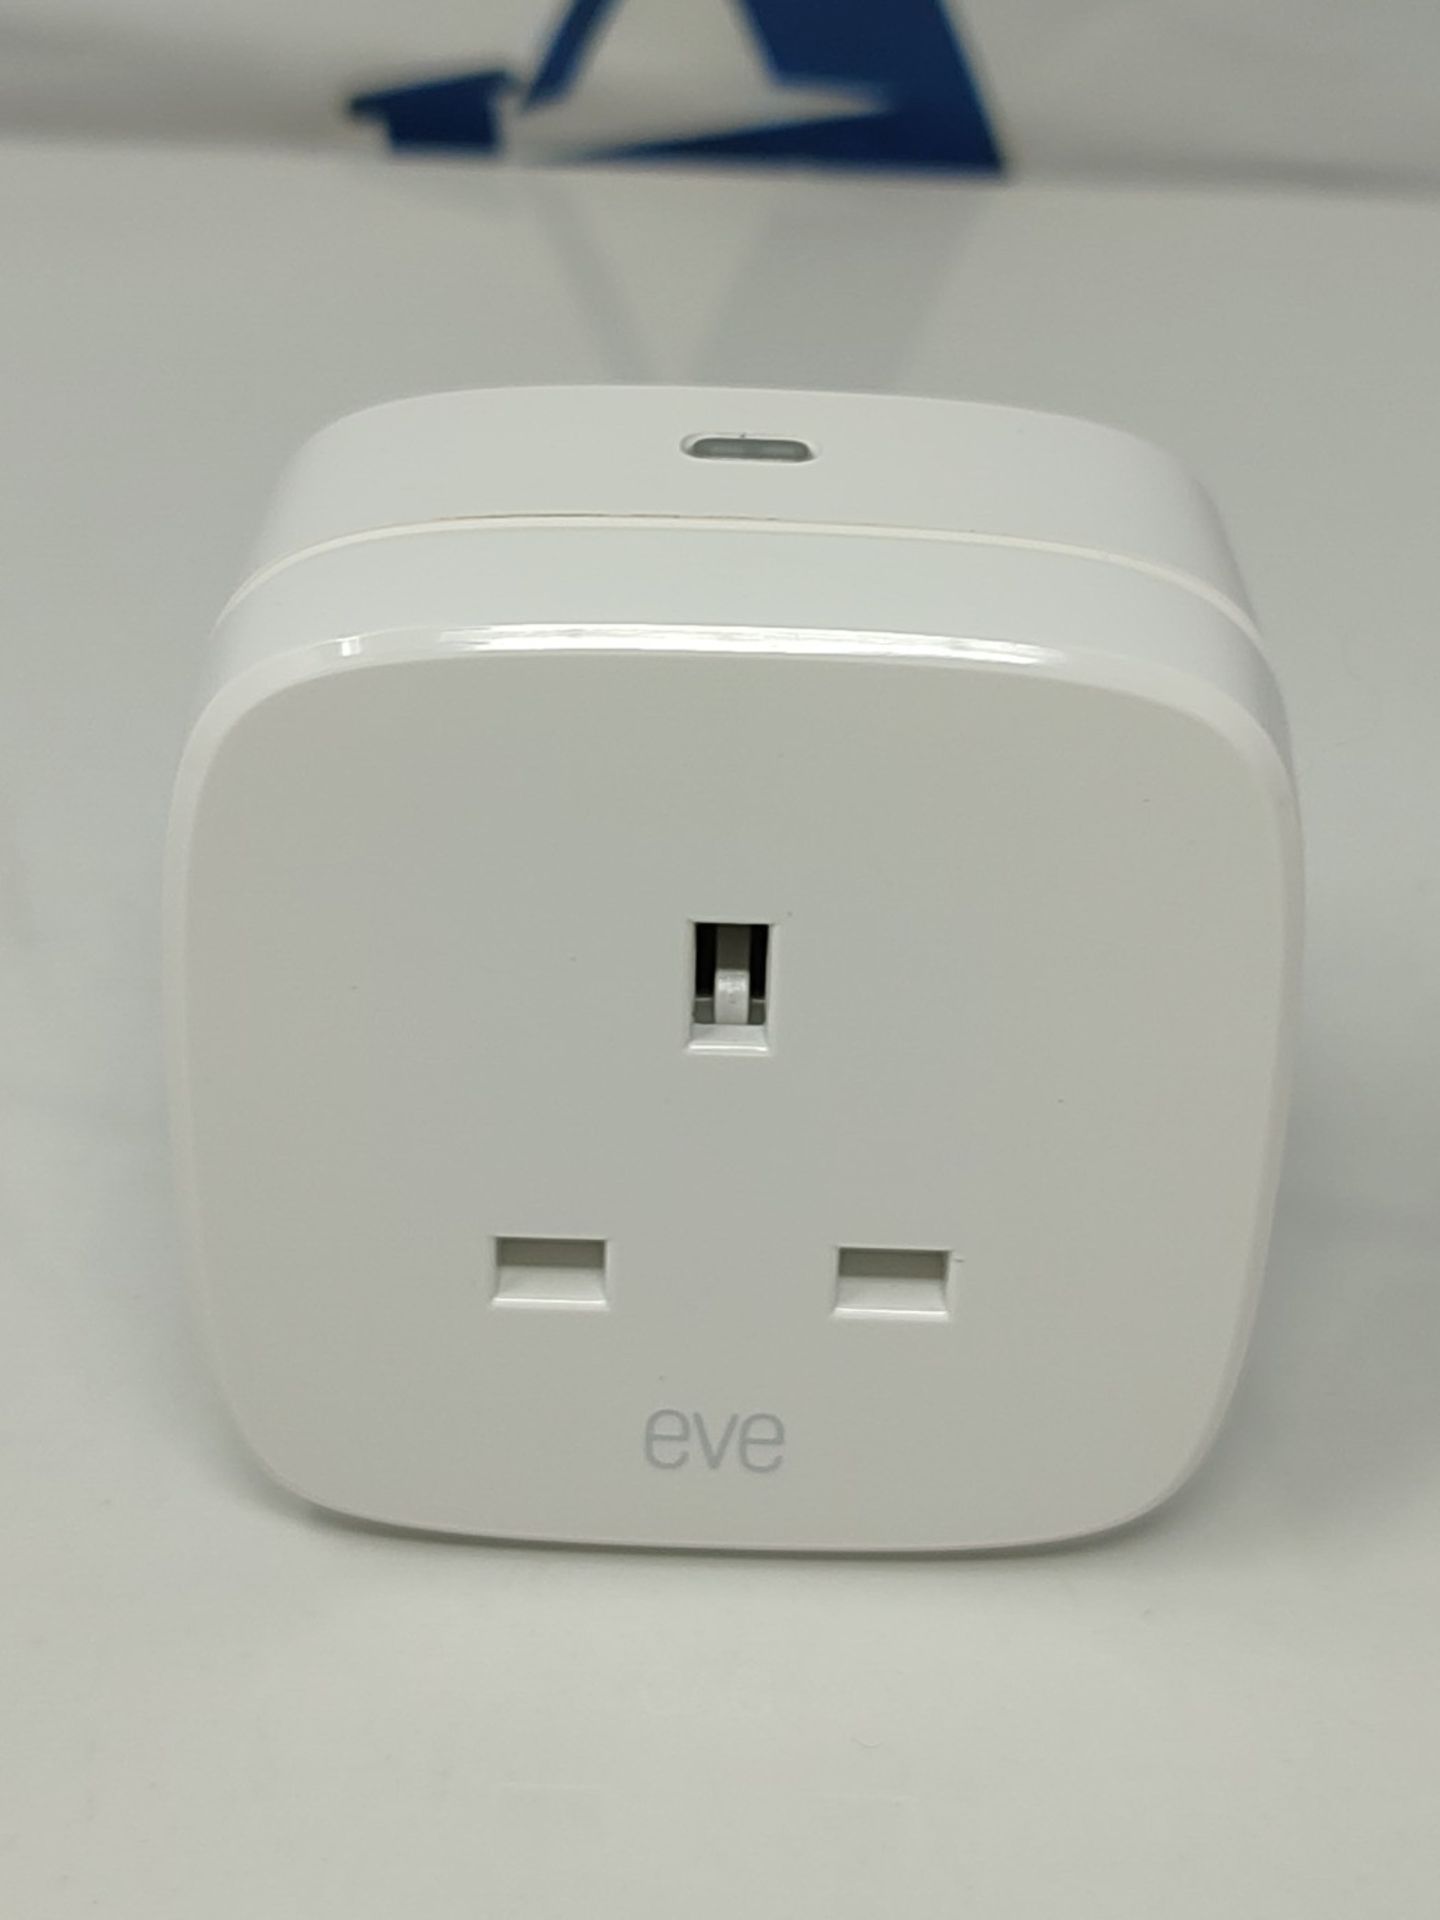 Eve Energy UK - Smart Plug & Power Meter with Built-in Schedules, Voice Control, no Br - Image 2 of 2